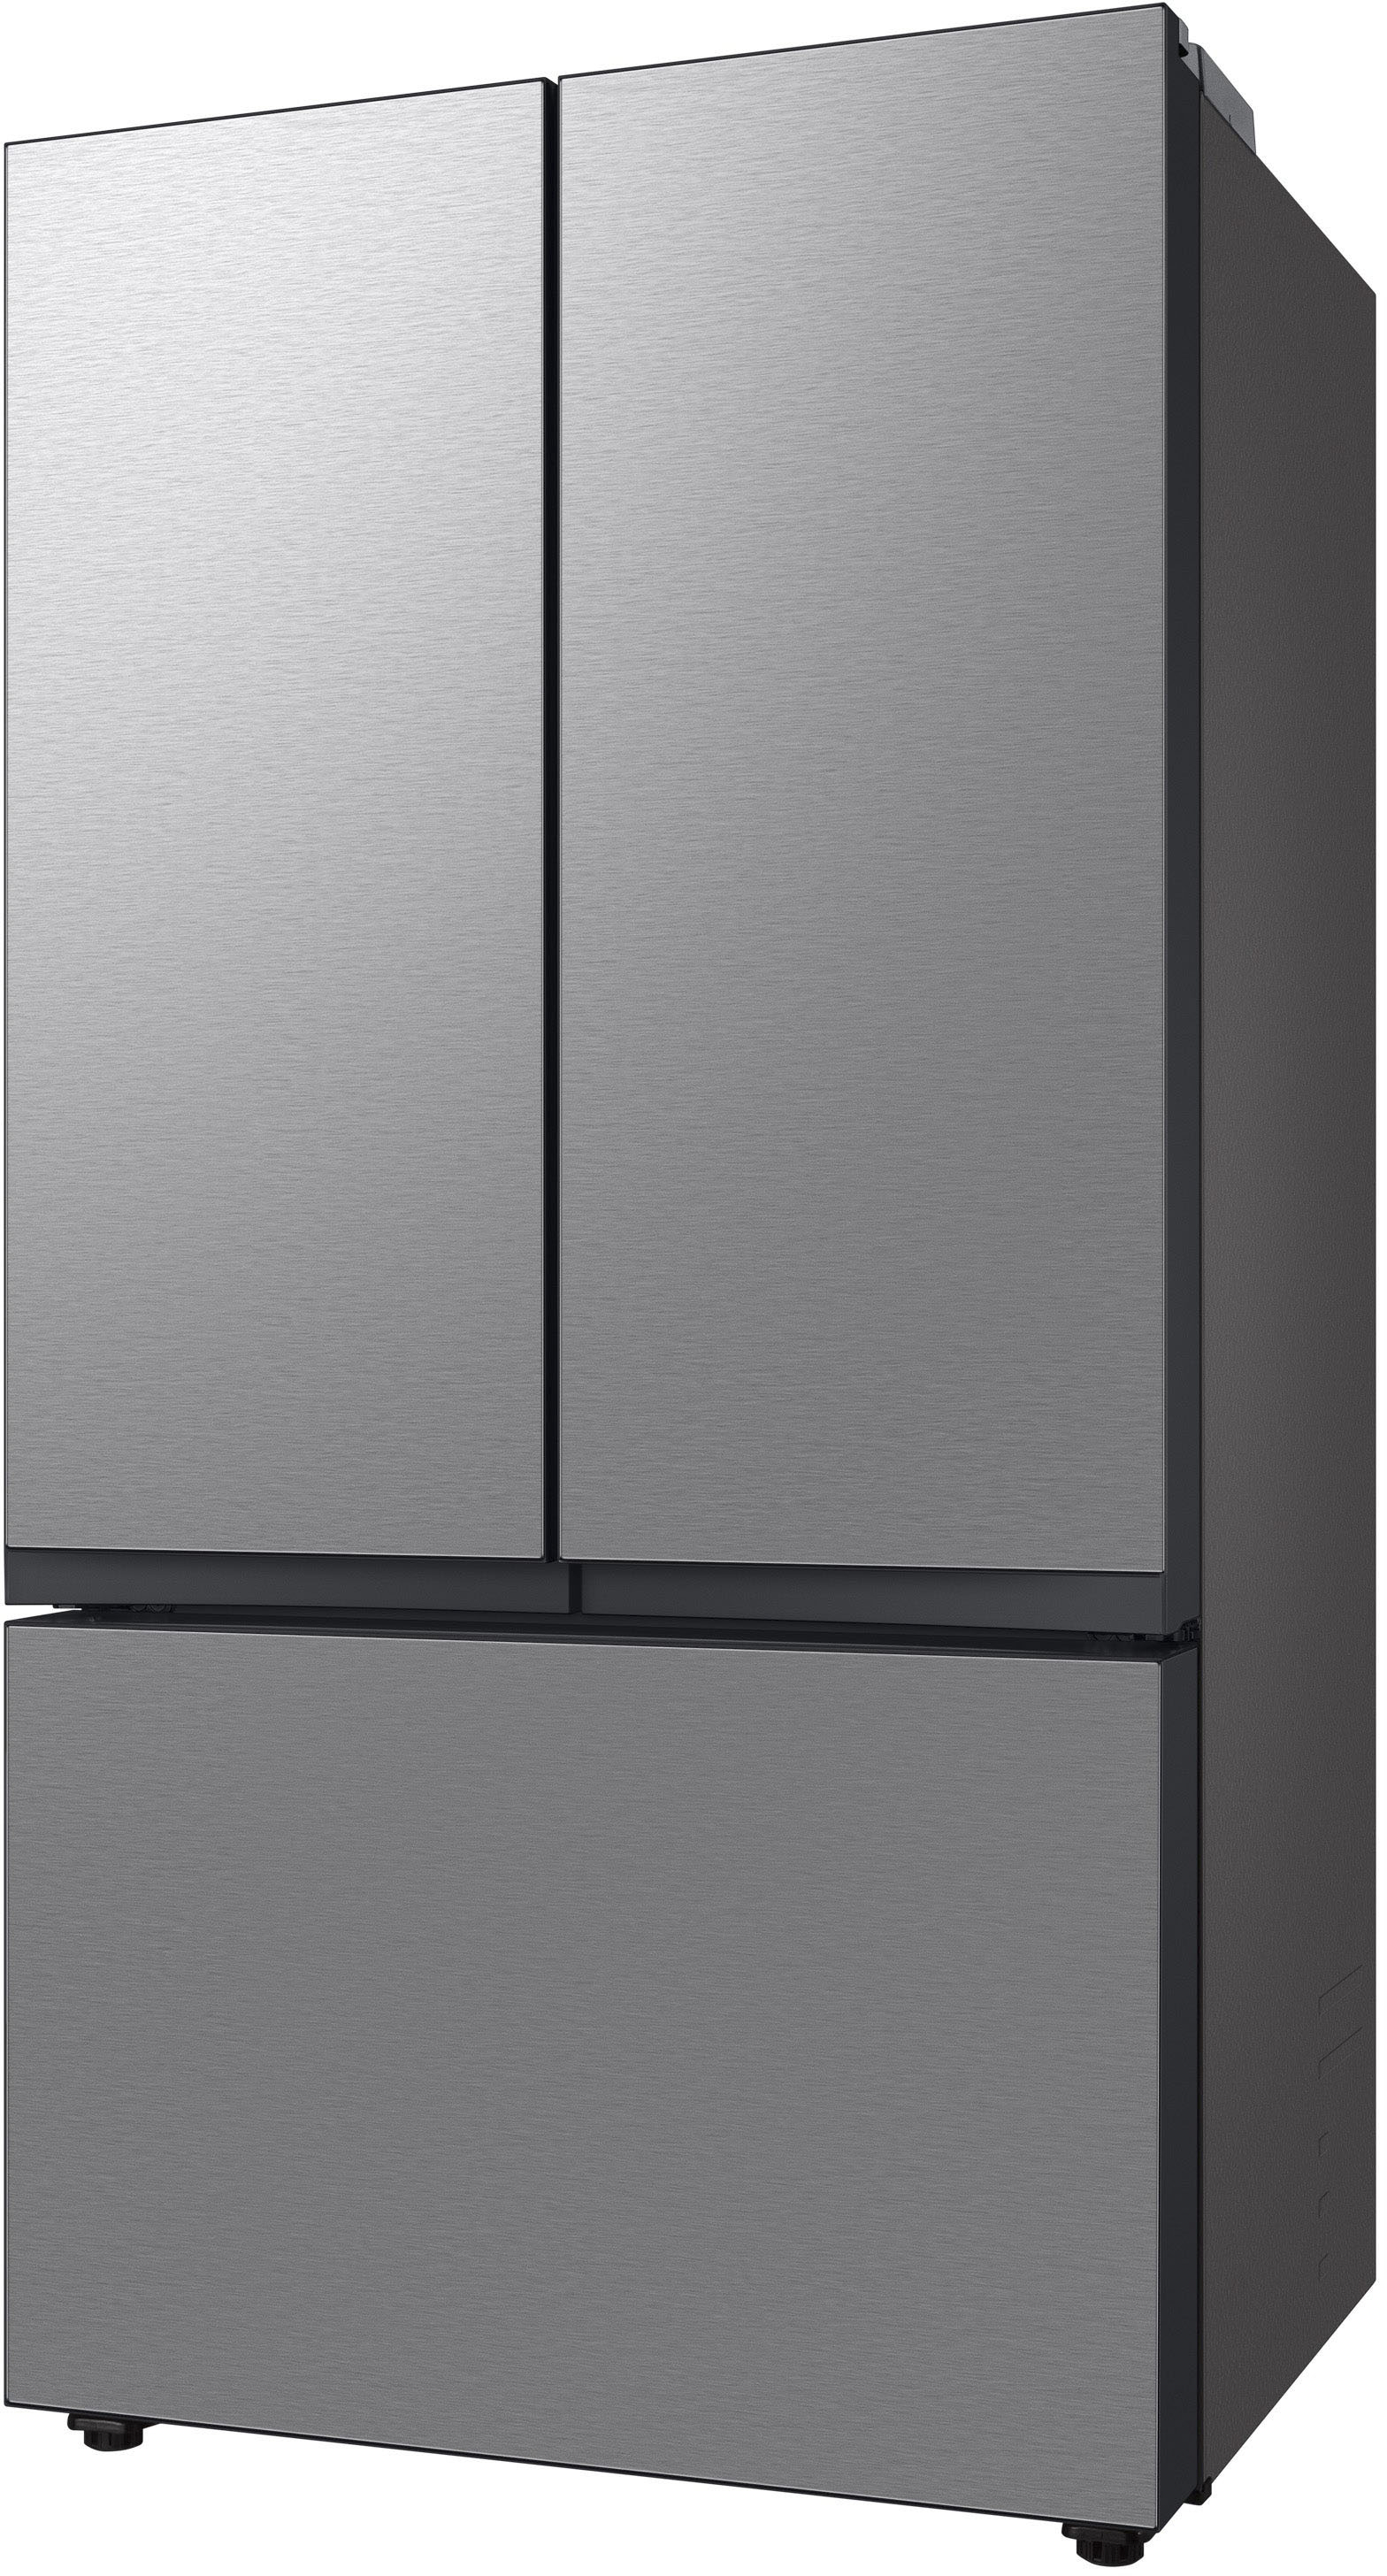 RF24BB620012AA by Samsung - Bespoke 3-Door French Door Refrigerator (24 cu.  ft.) with AutoFill Water Pitcher in White Glass